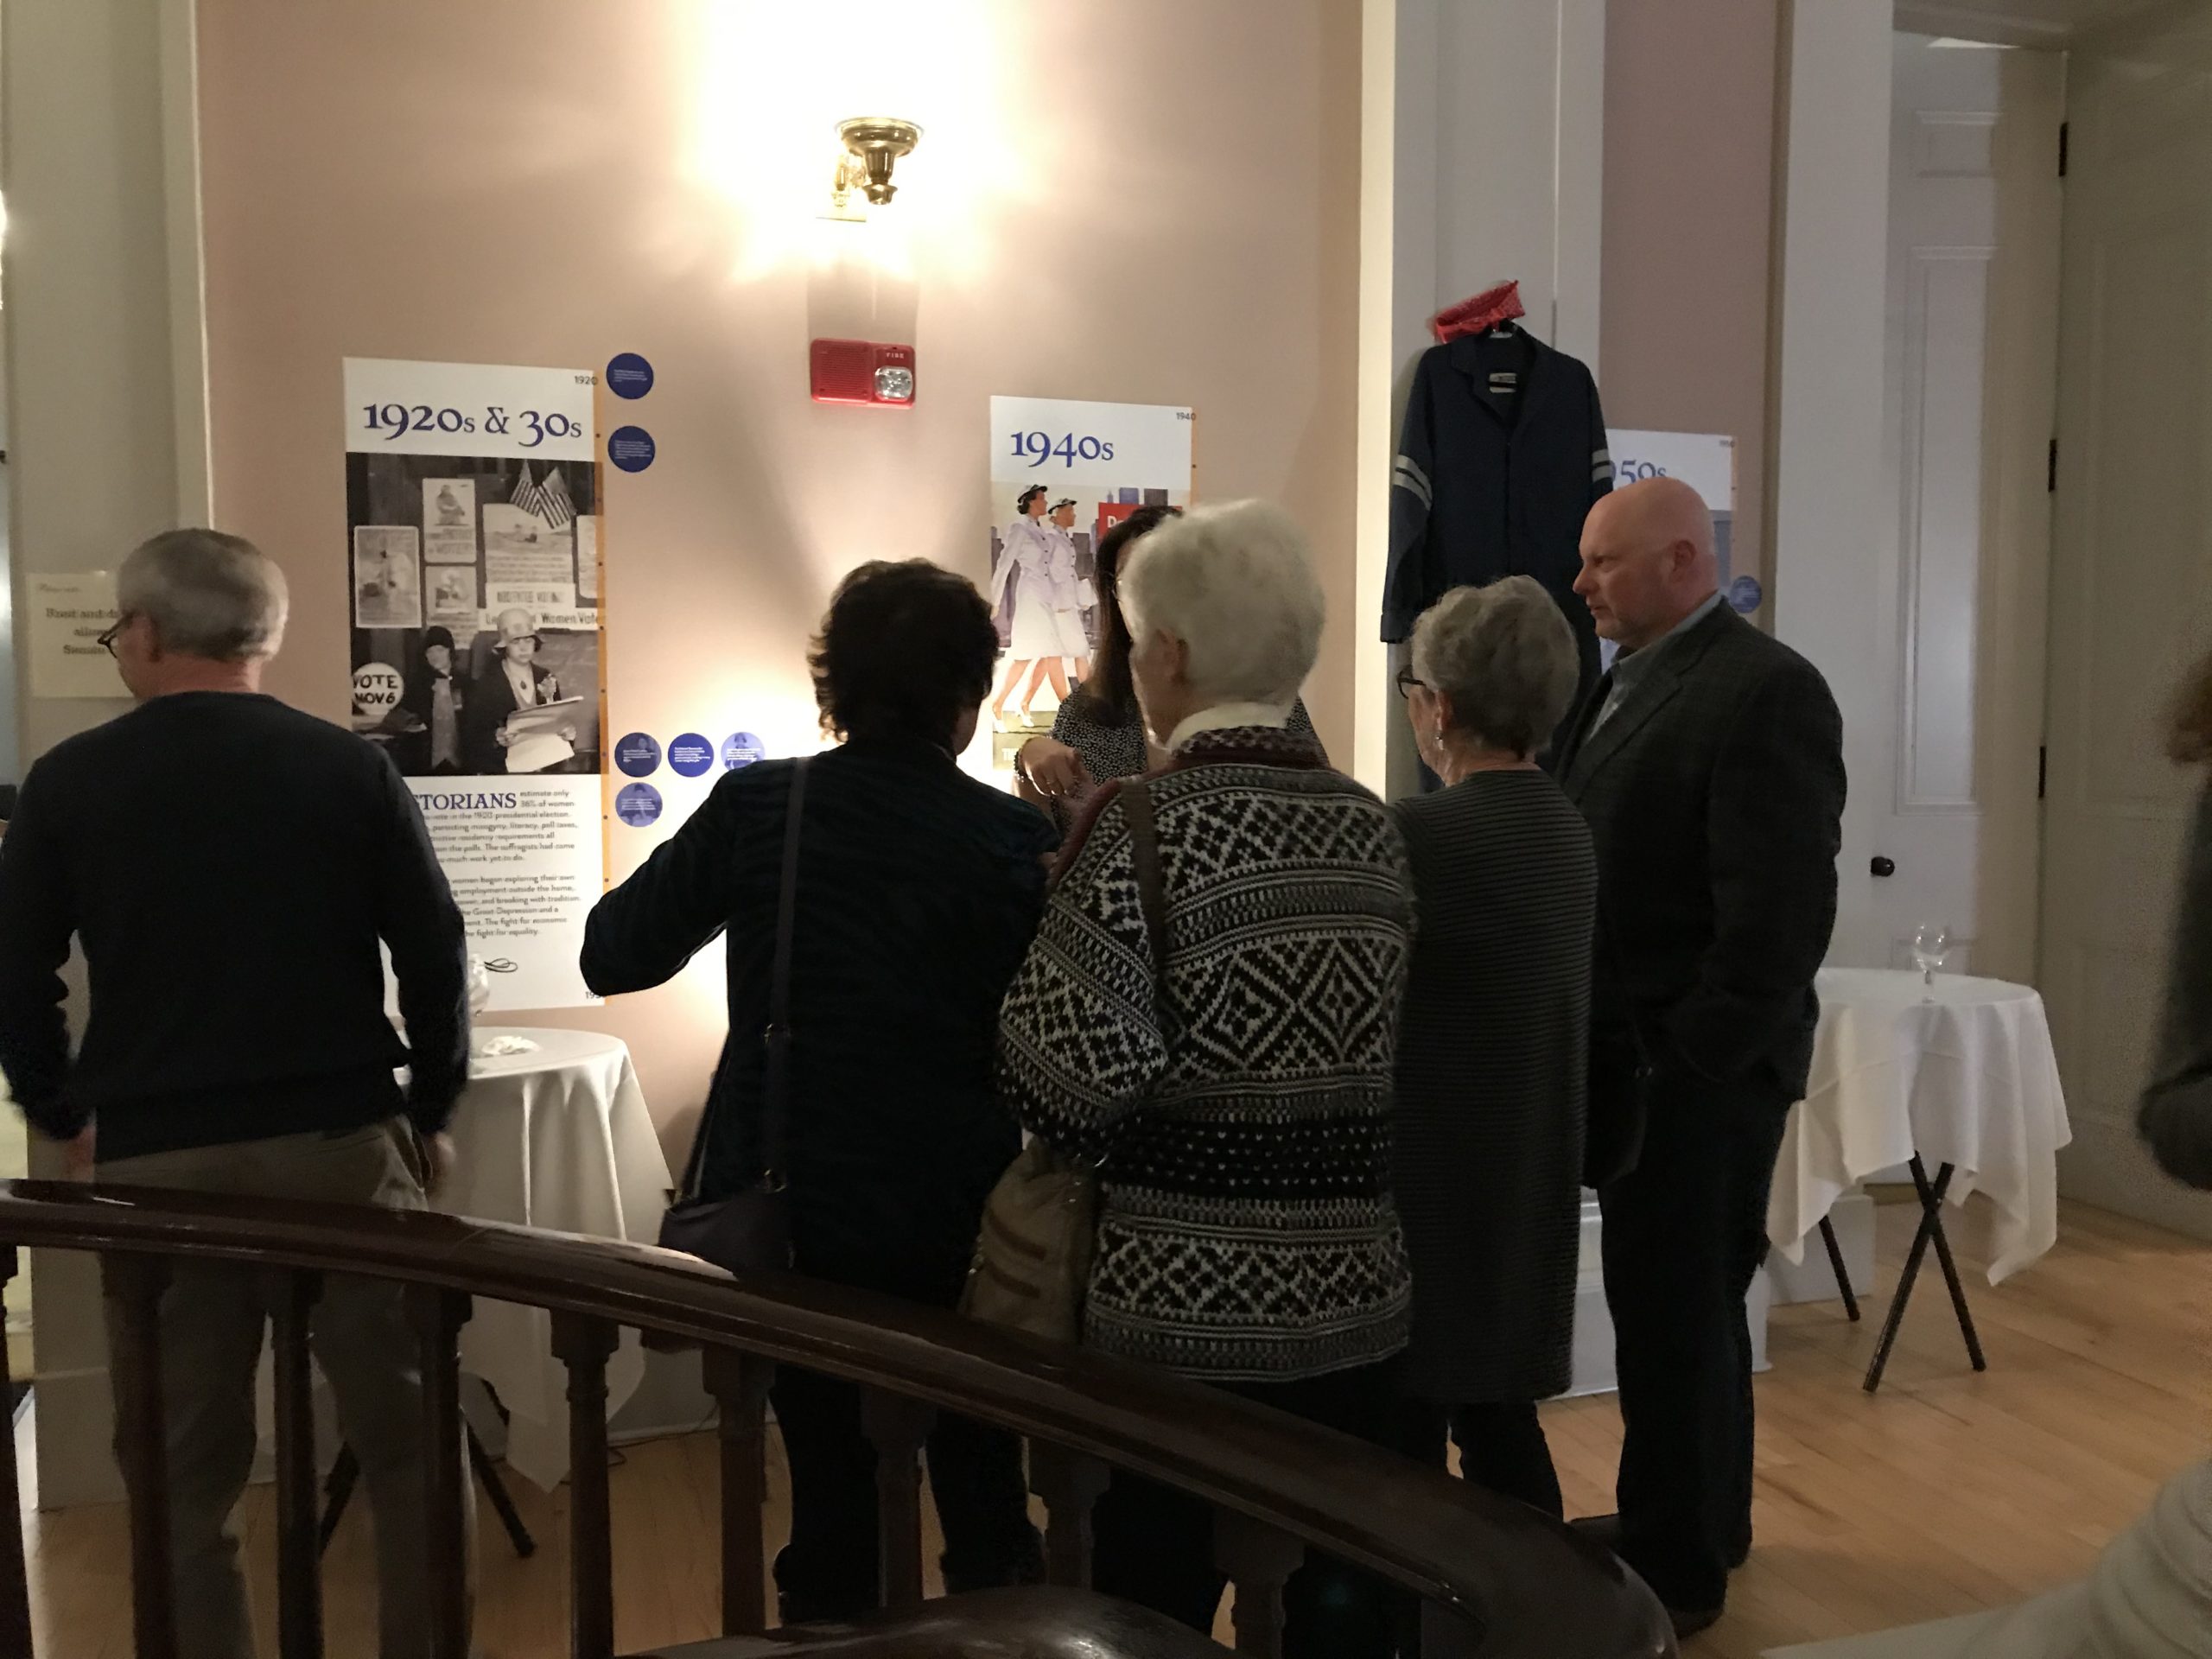 Attendees gather around exhibit pieces at the 19th Amendment Centennial